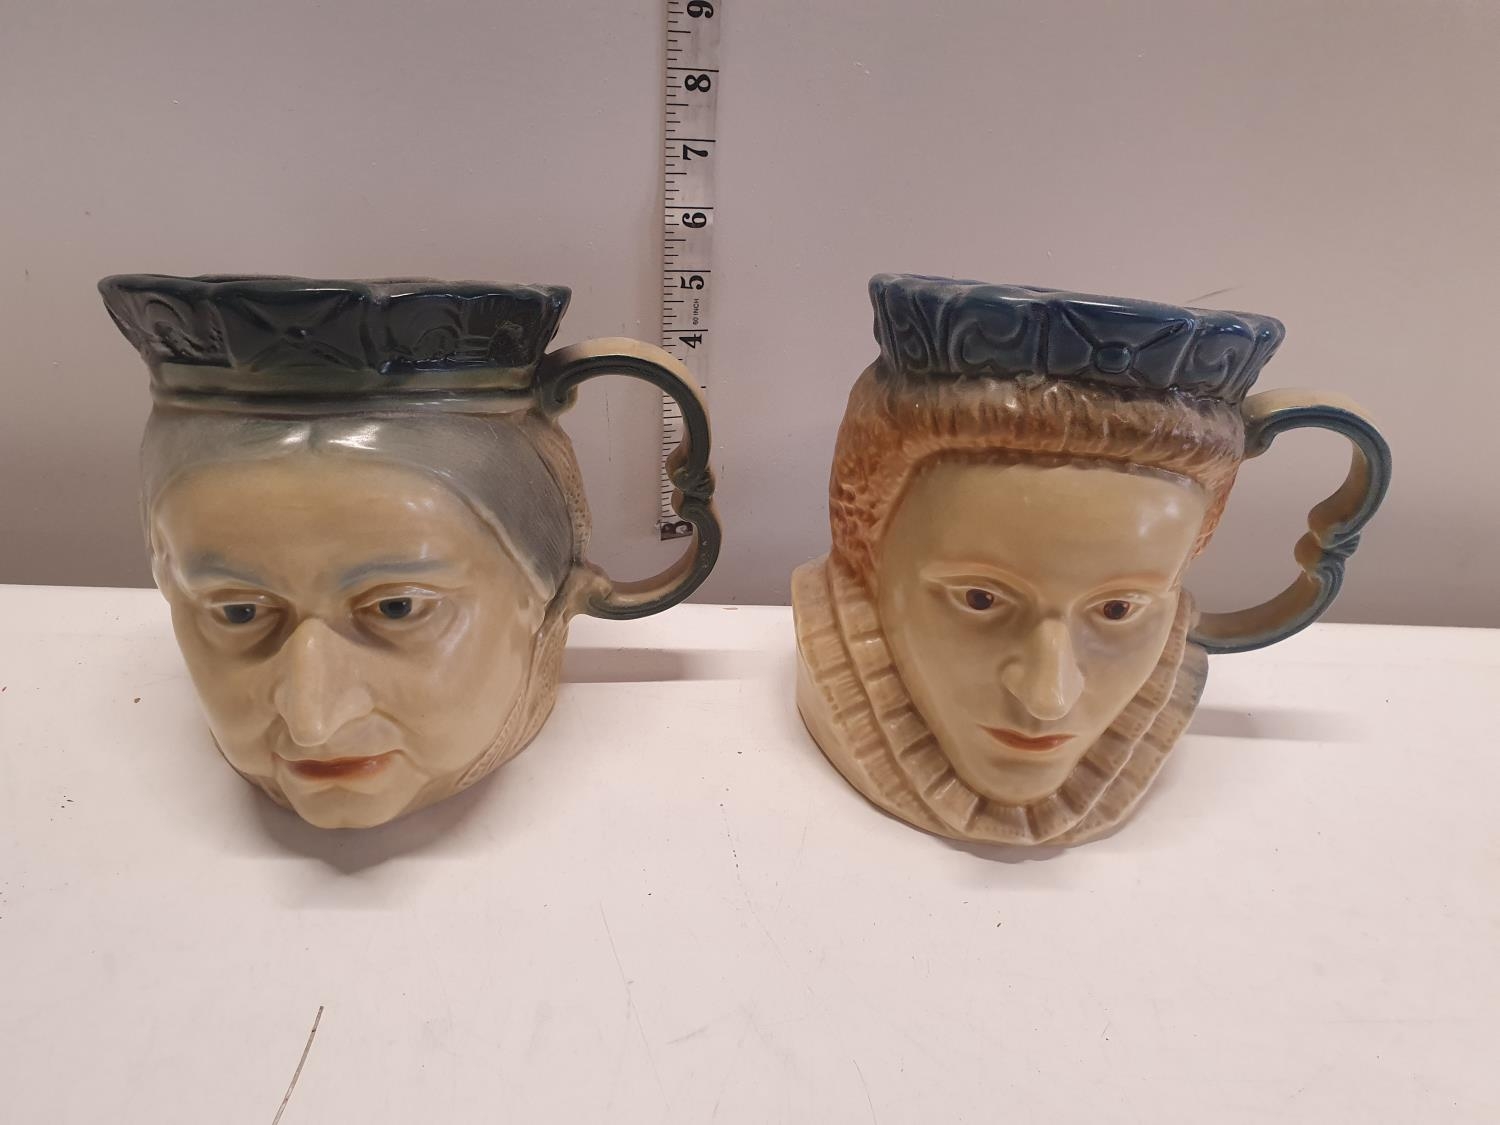 Two character jugs of Queen Victoria and Elizabeth I